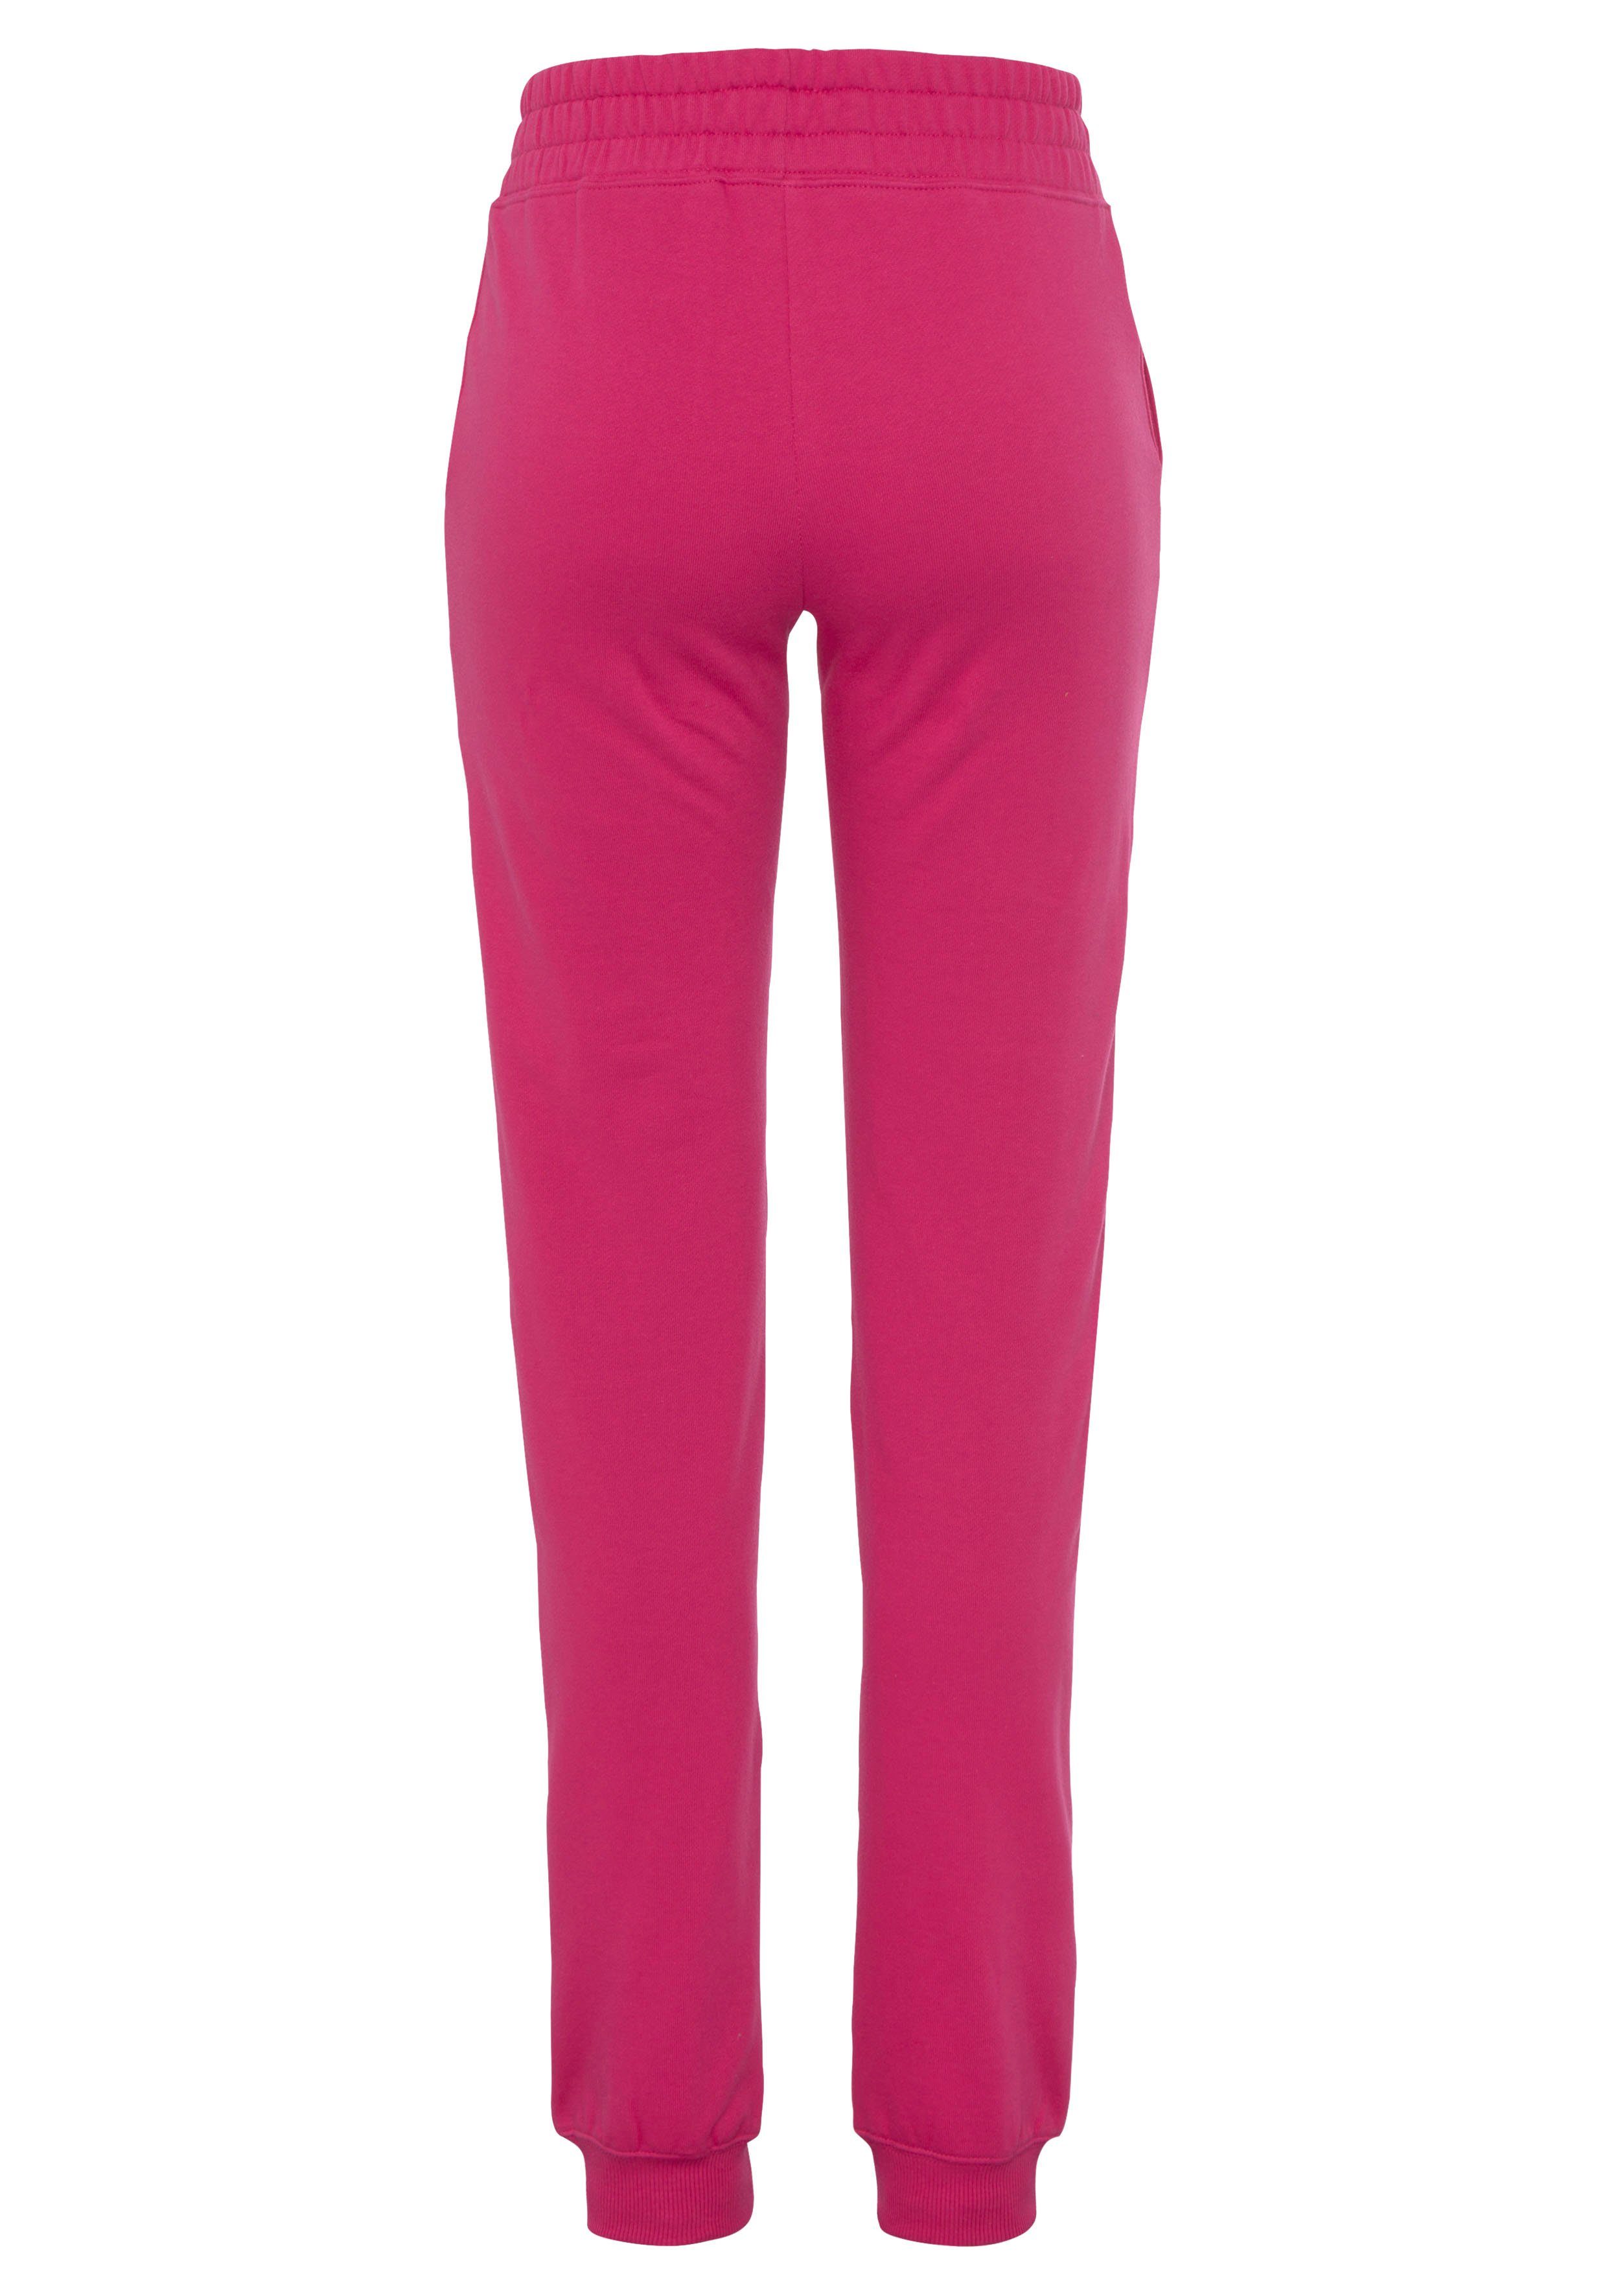 H.I.S Relaxhose mit Piping pink vorn, Loungeanzug